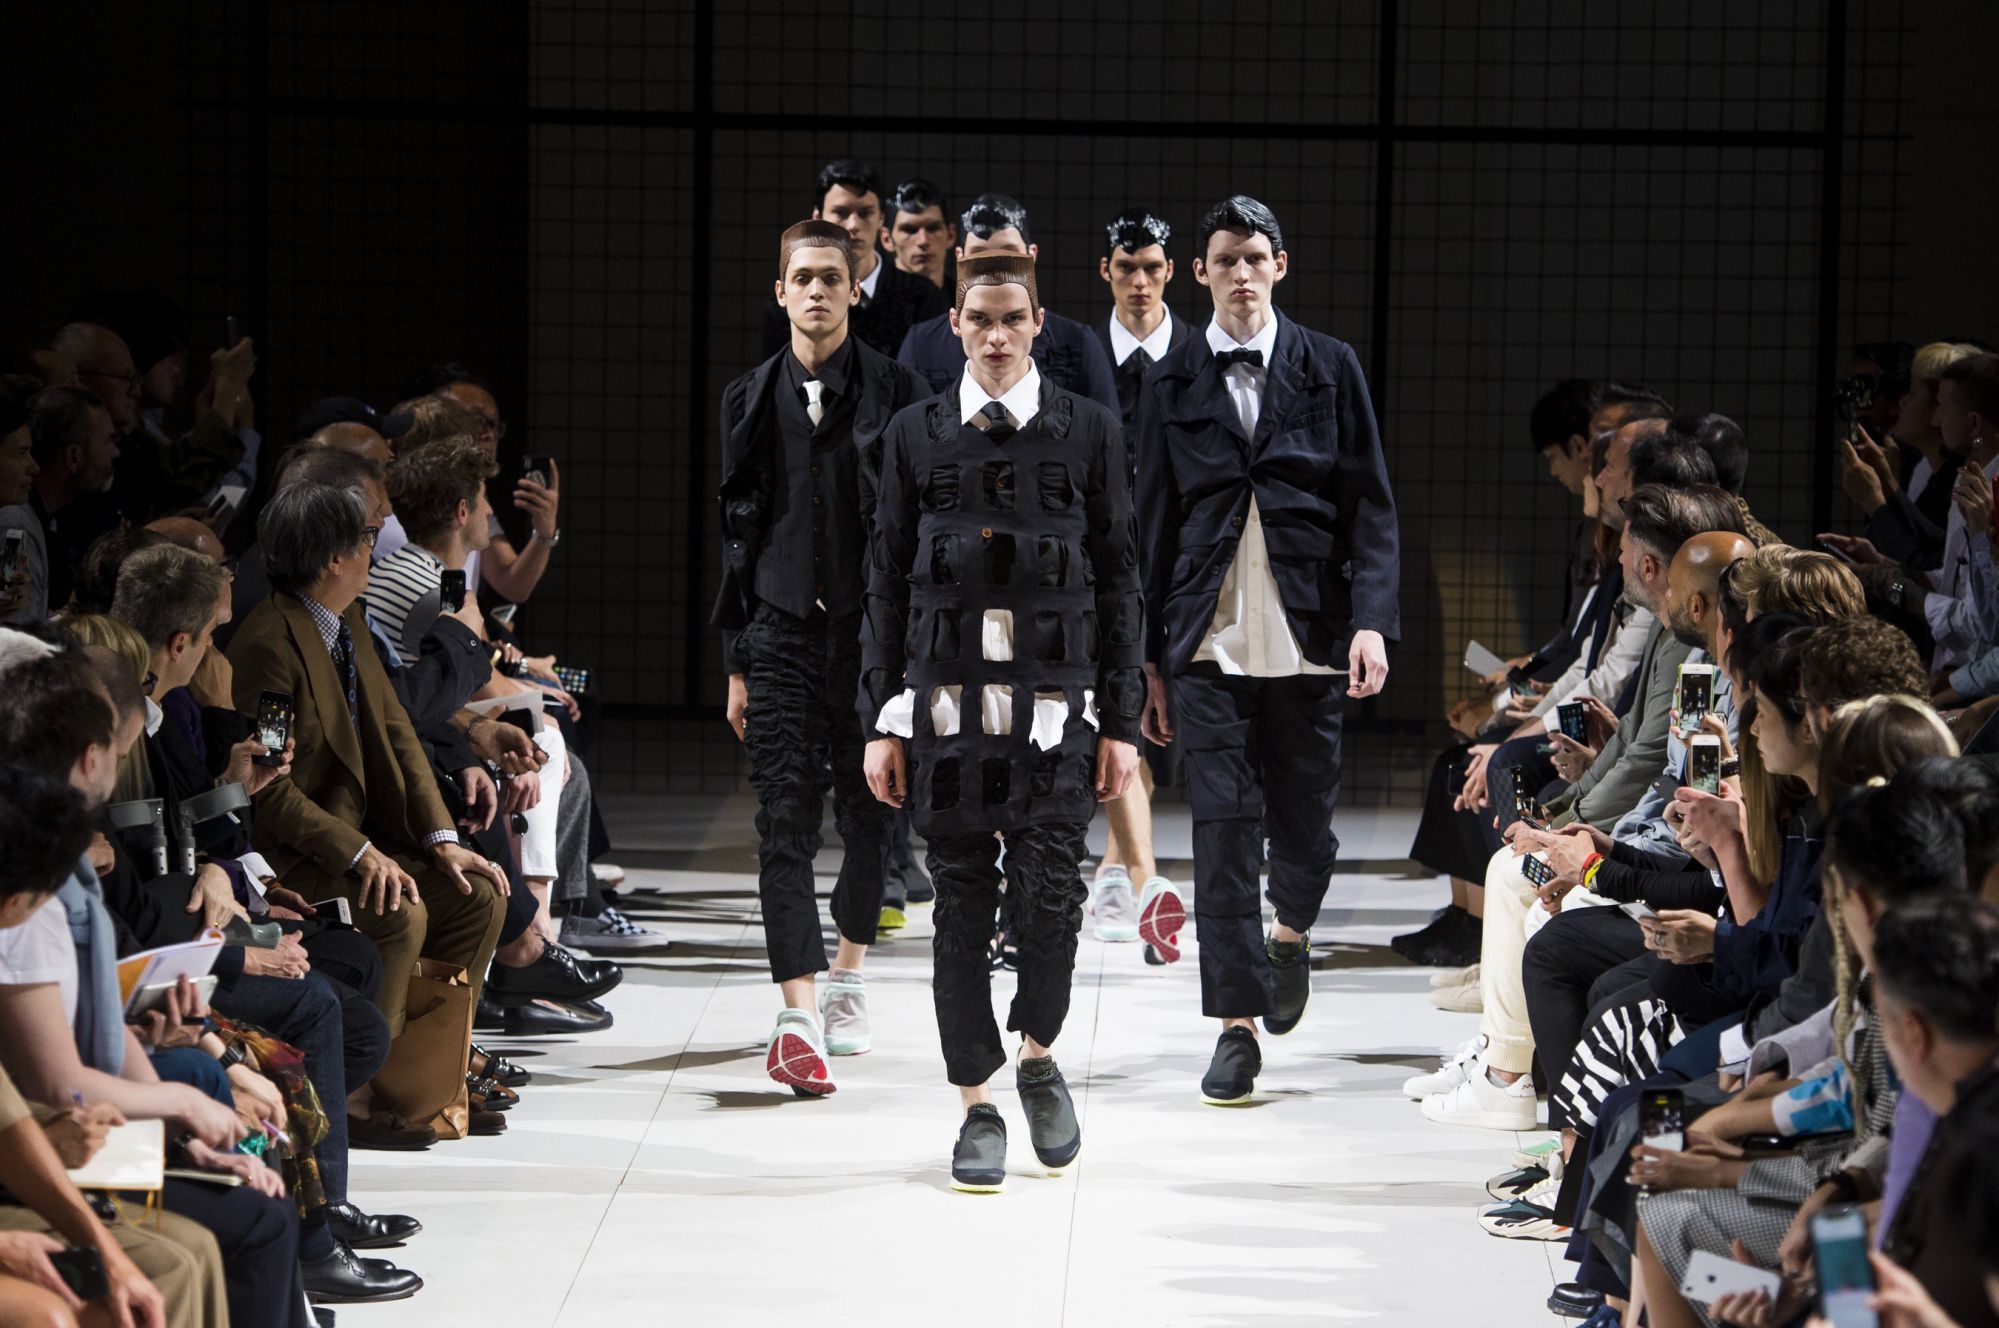 Man bags at dawn: the latest must have at Milan men's fashion week